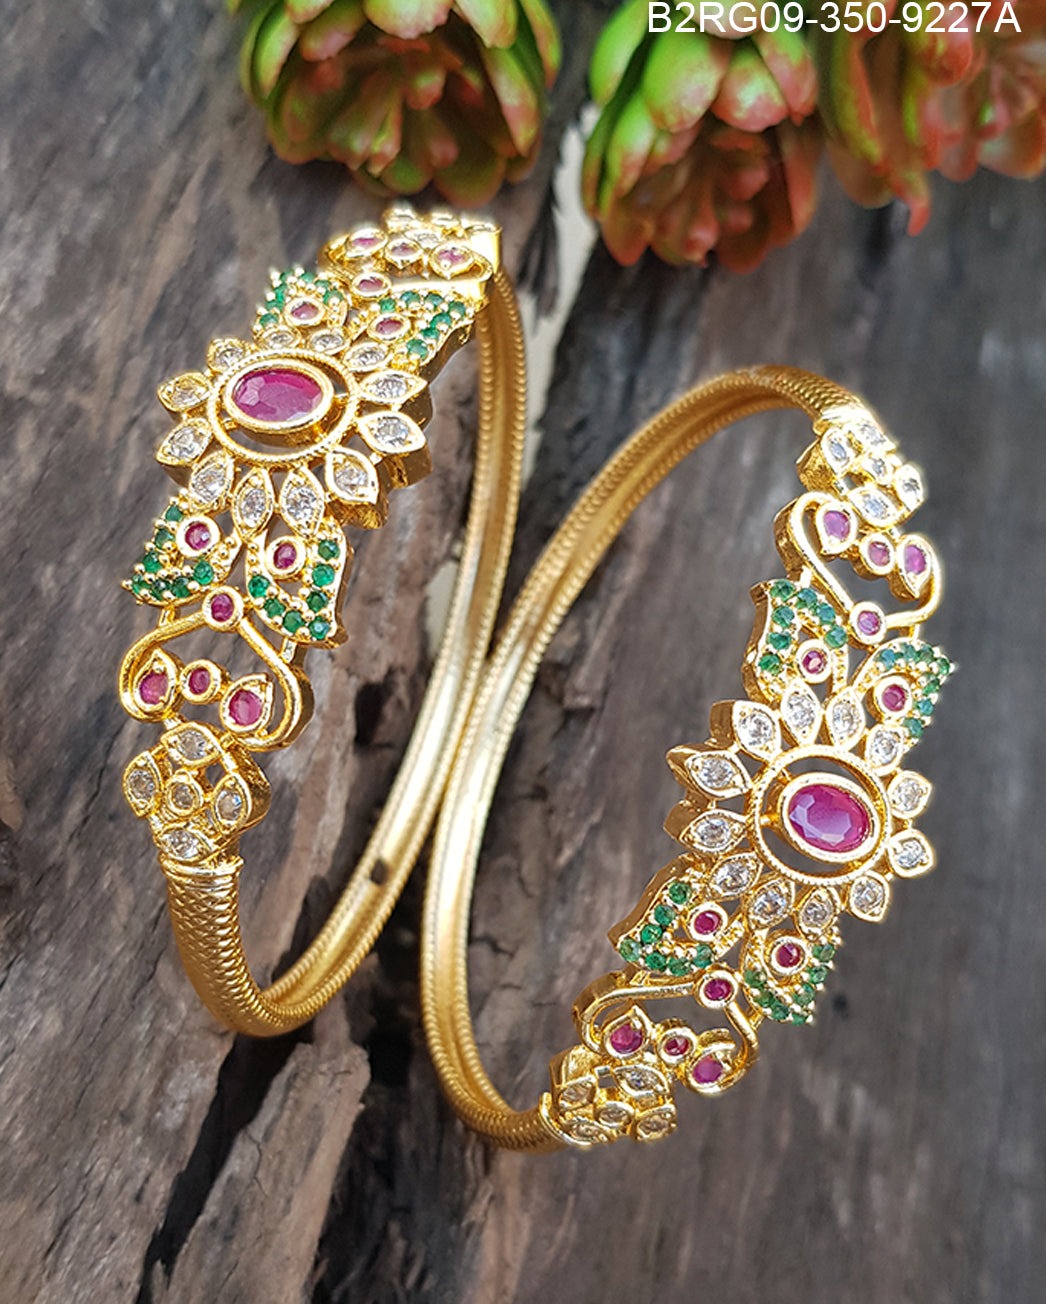 Premium Micro Gold Plated Set of 2 Temple Bangles 9227A